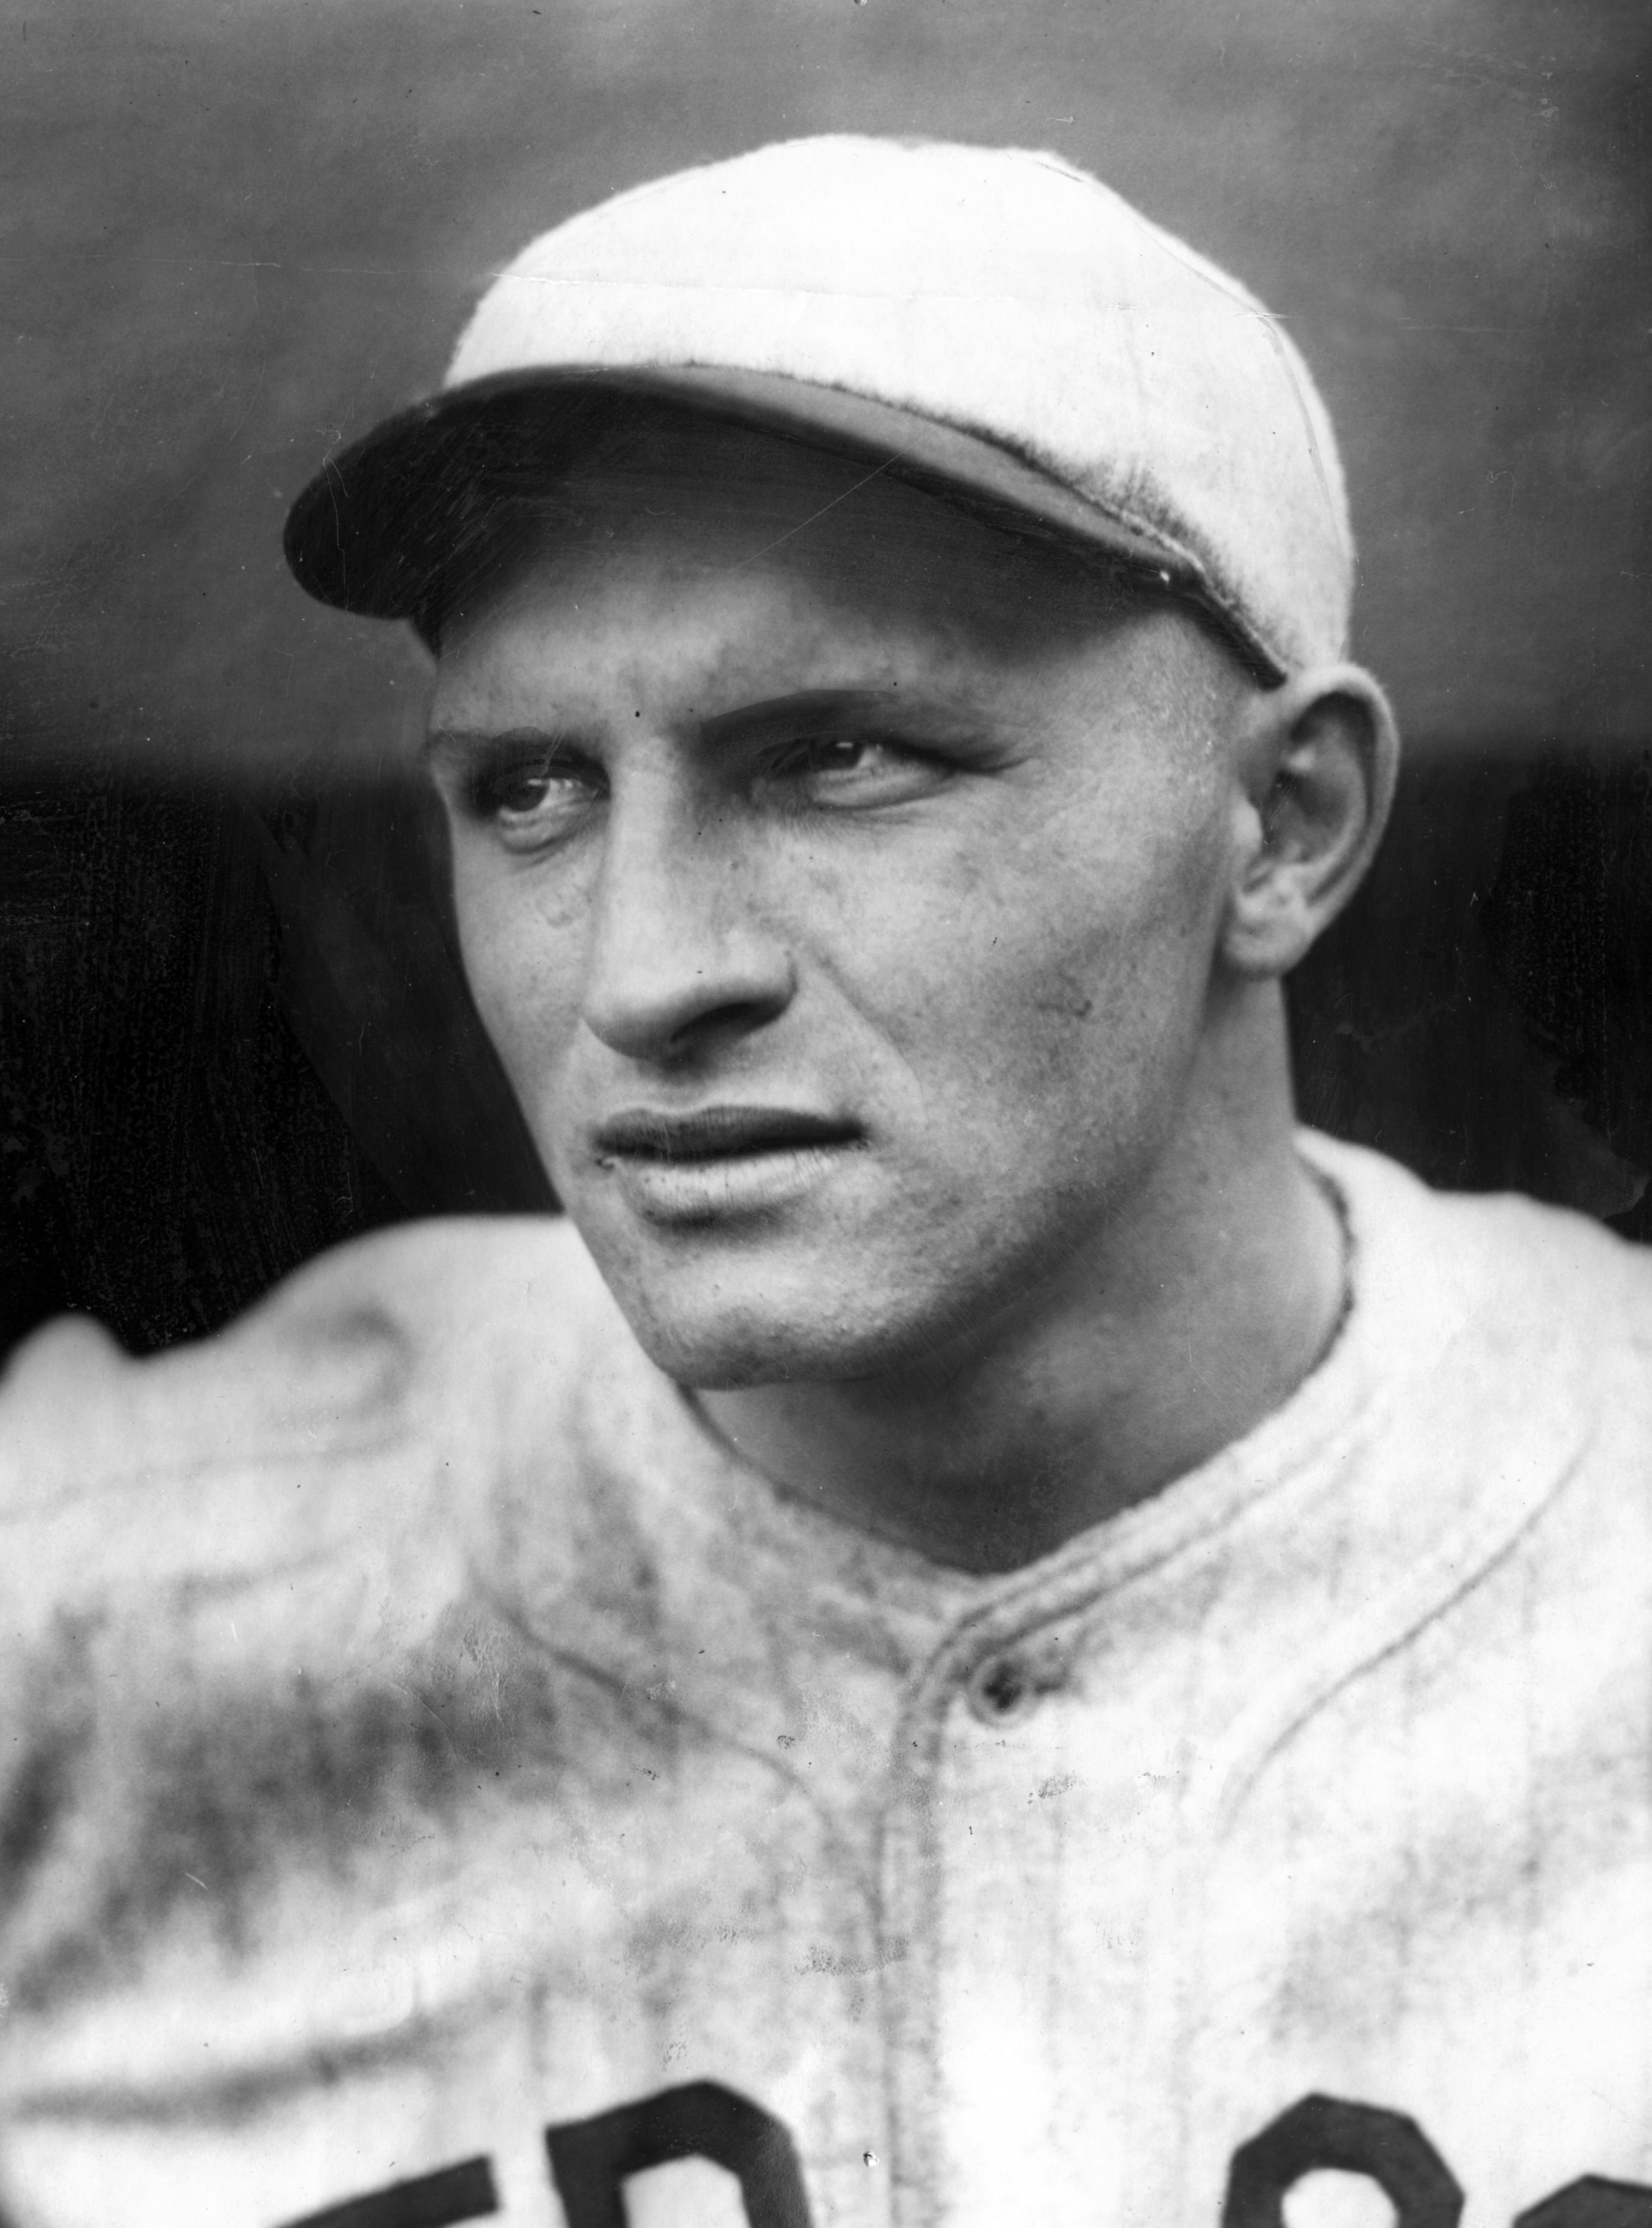 A fine defensive shortstop, helped the Tigers win the AL title in 1934 and the World Series in 1935.